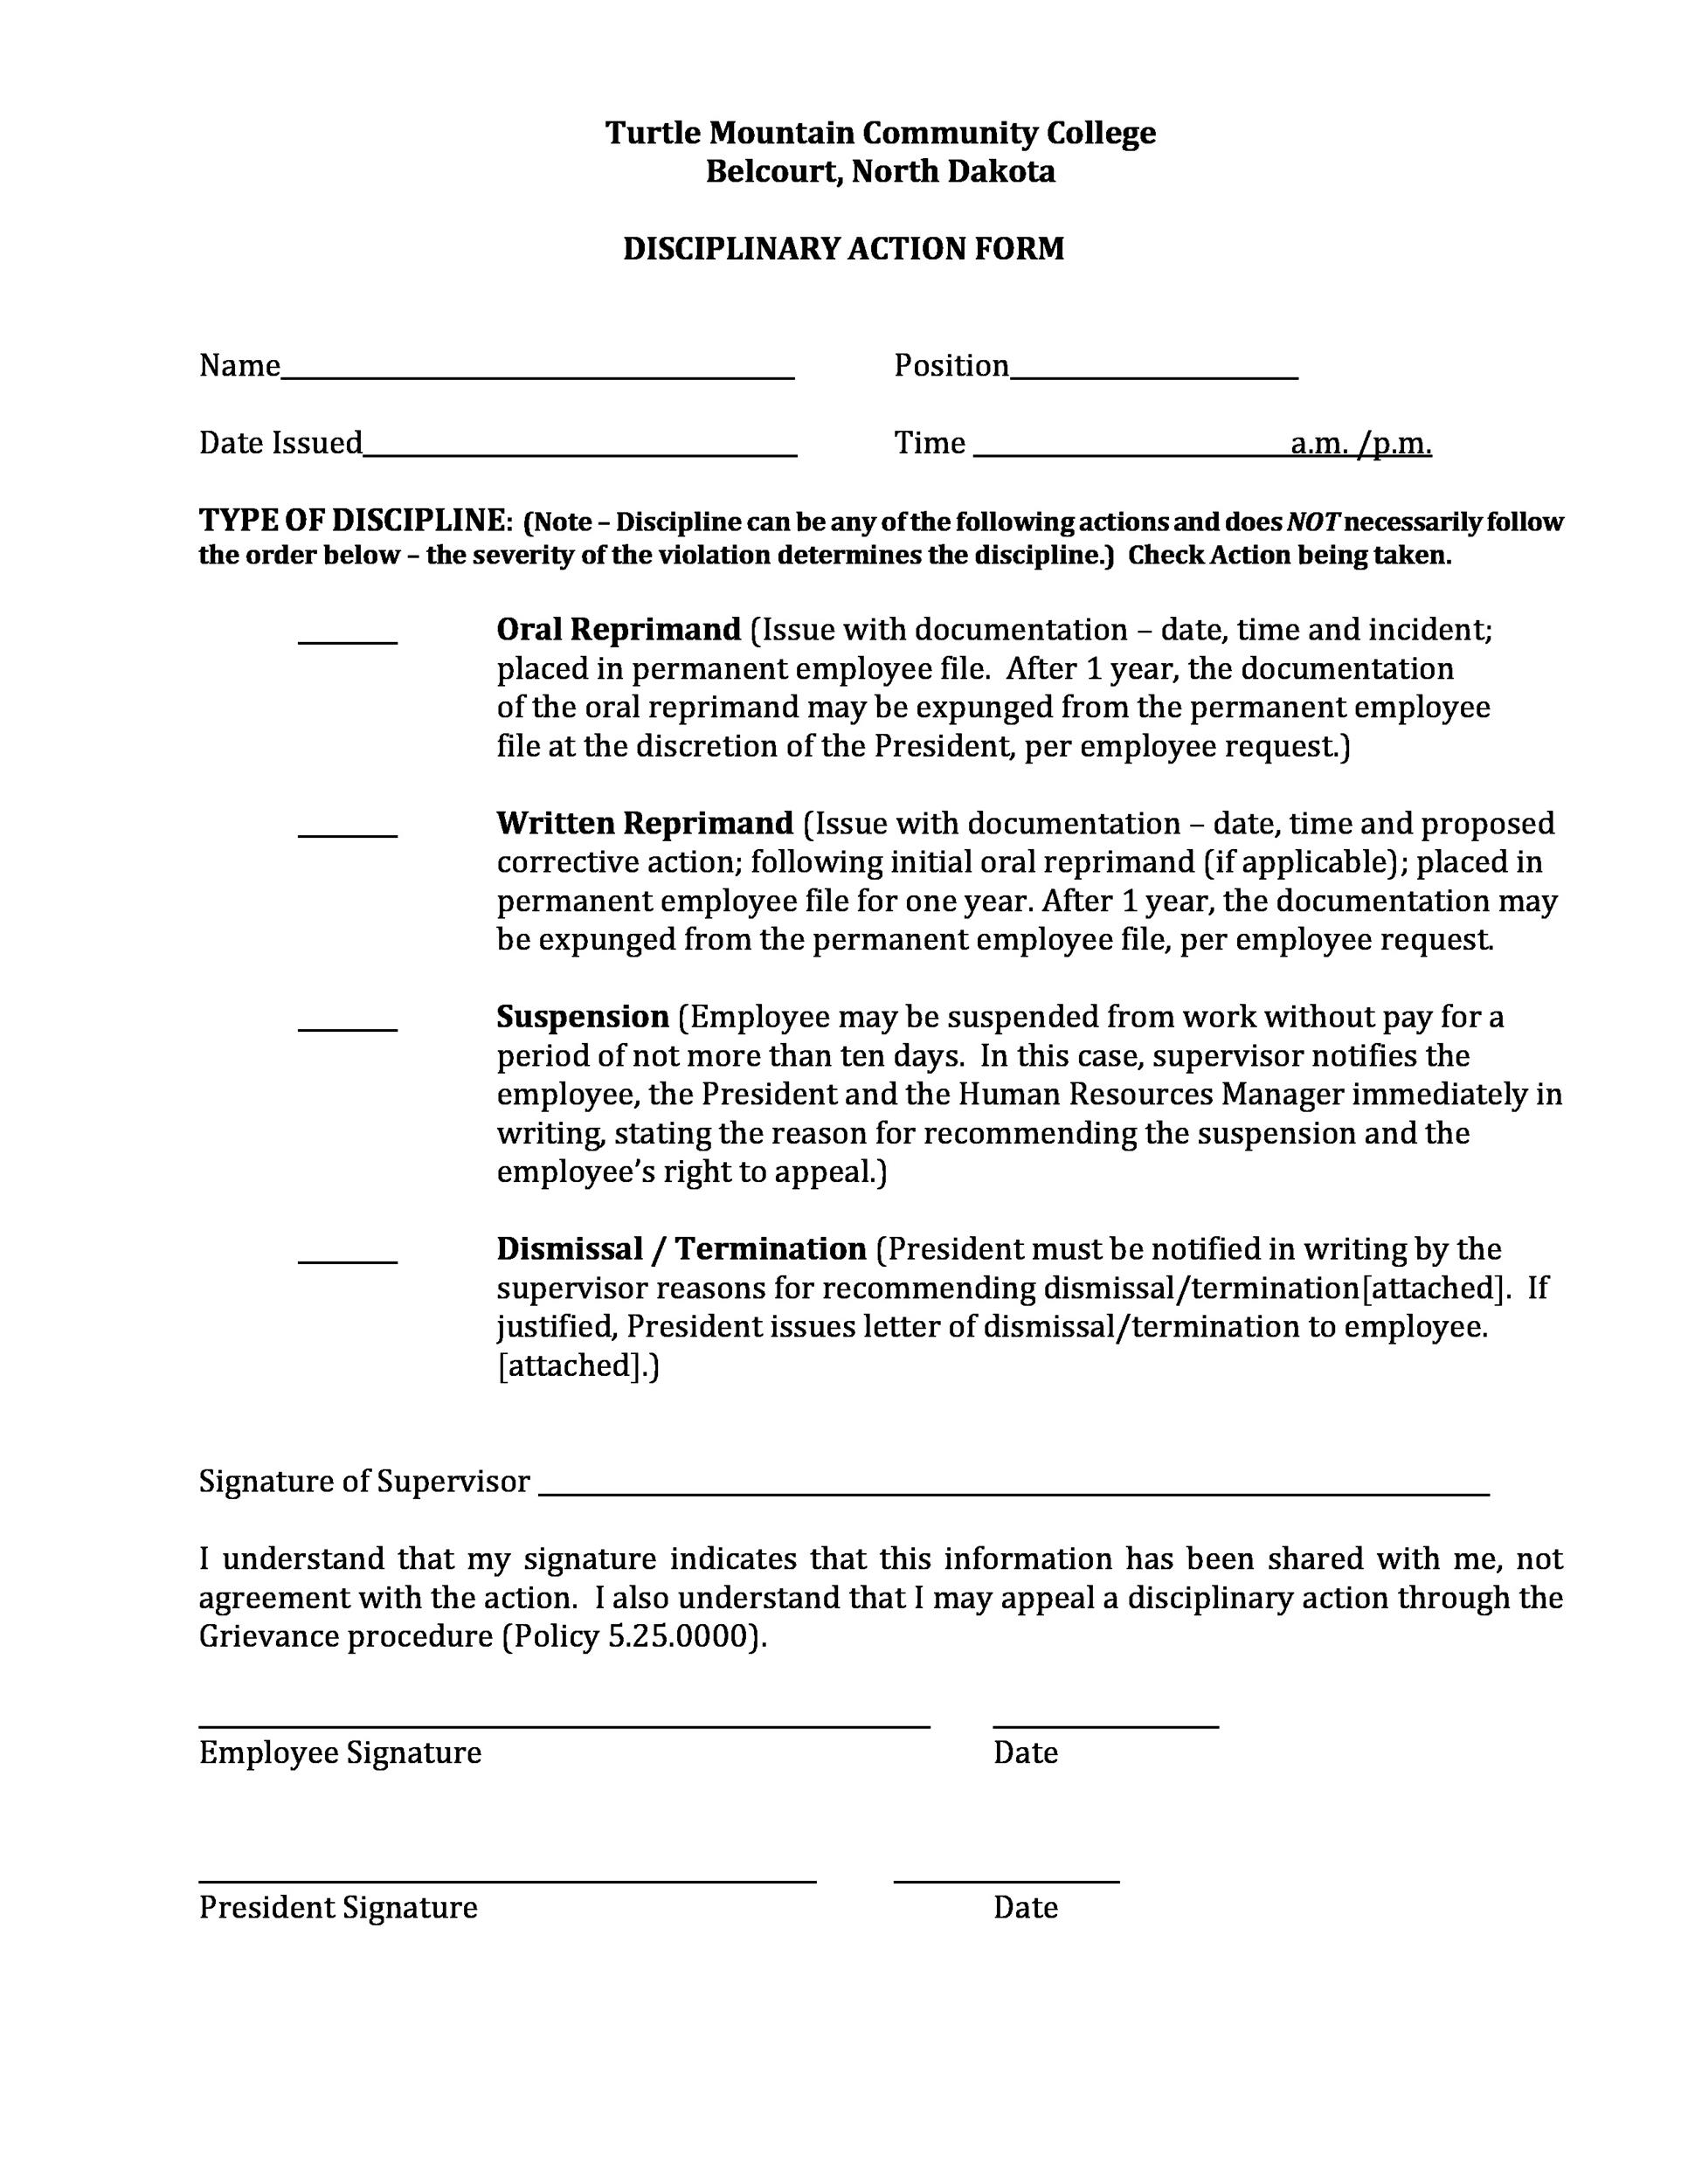 46 Effective Employee Write Up Forms Disciplinary Action Forms 